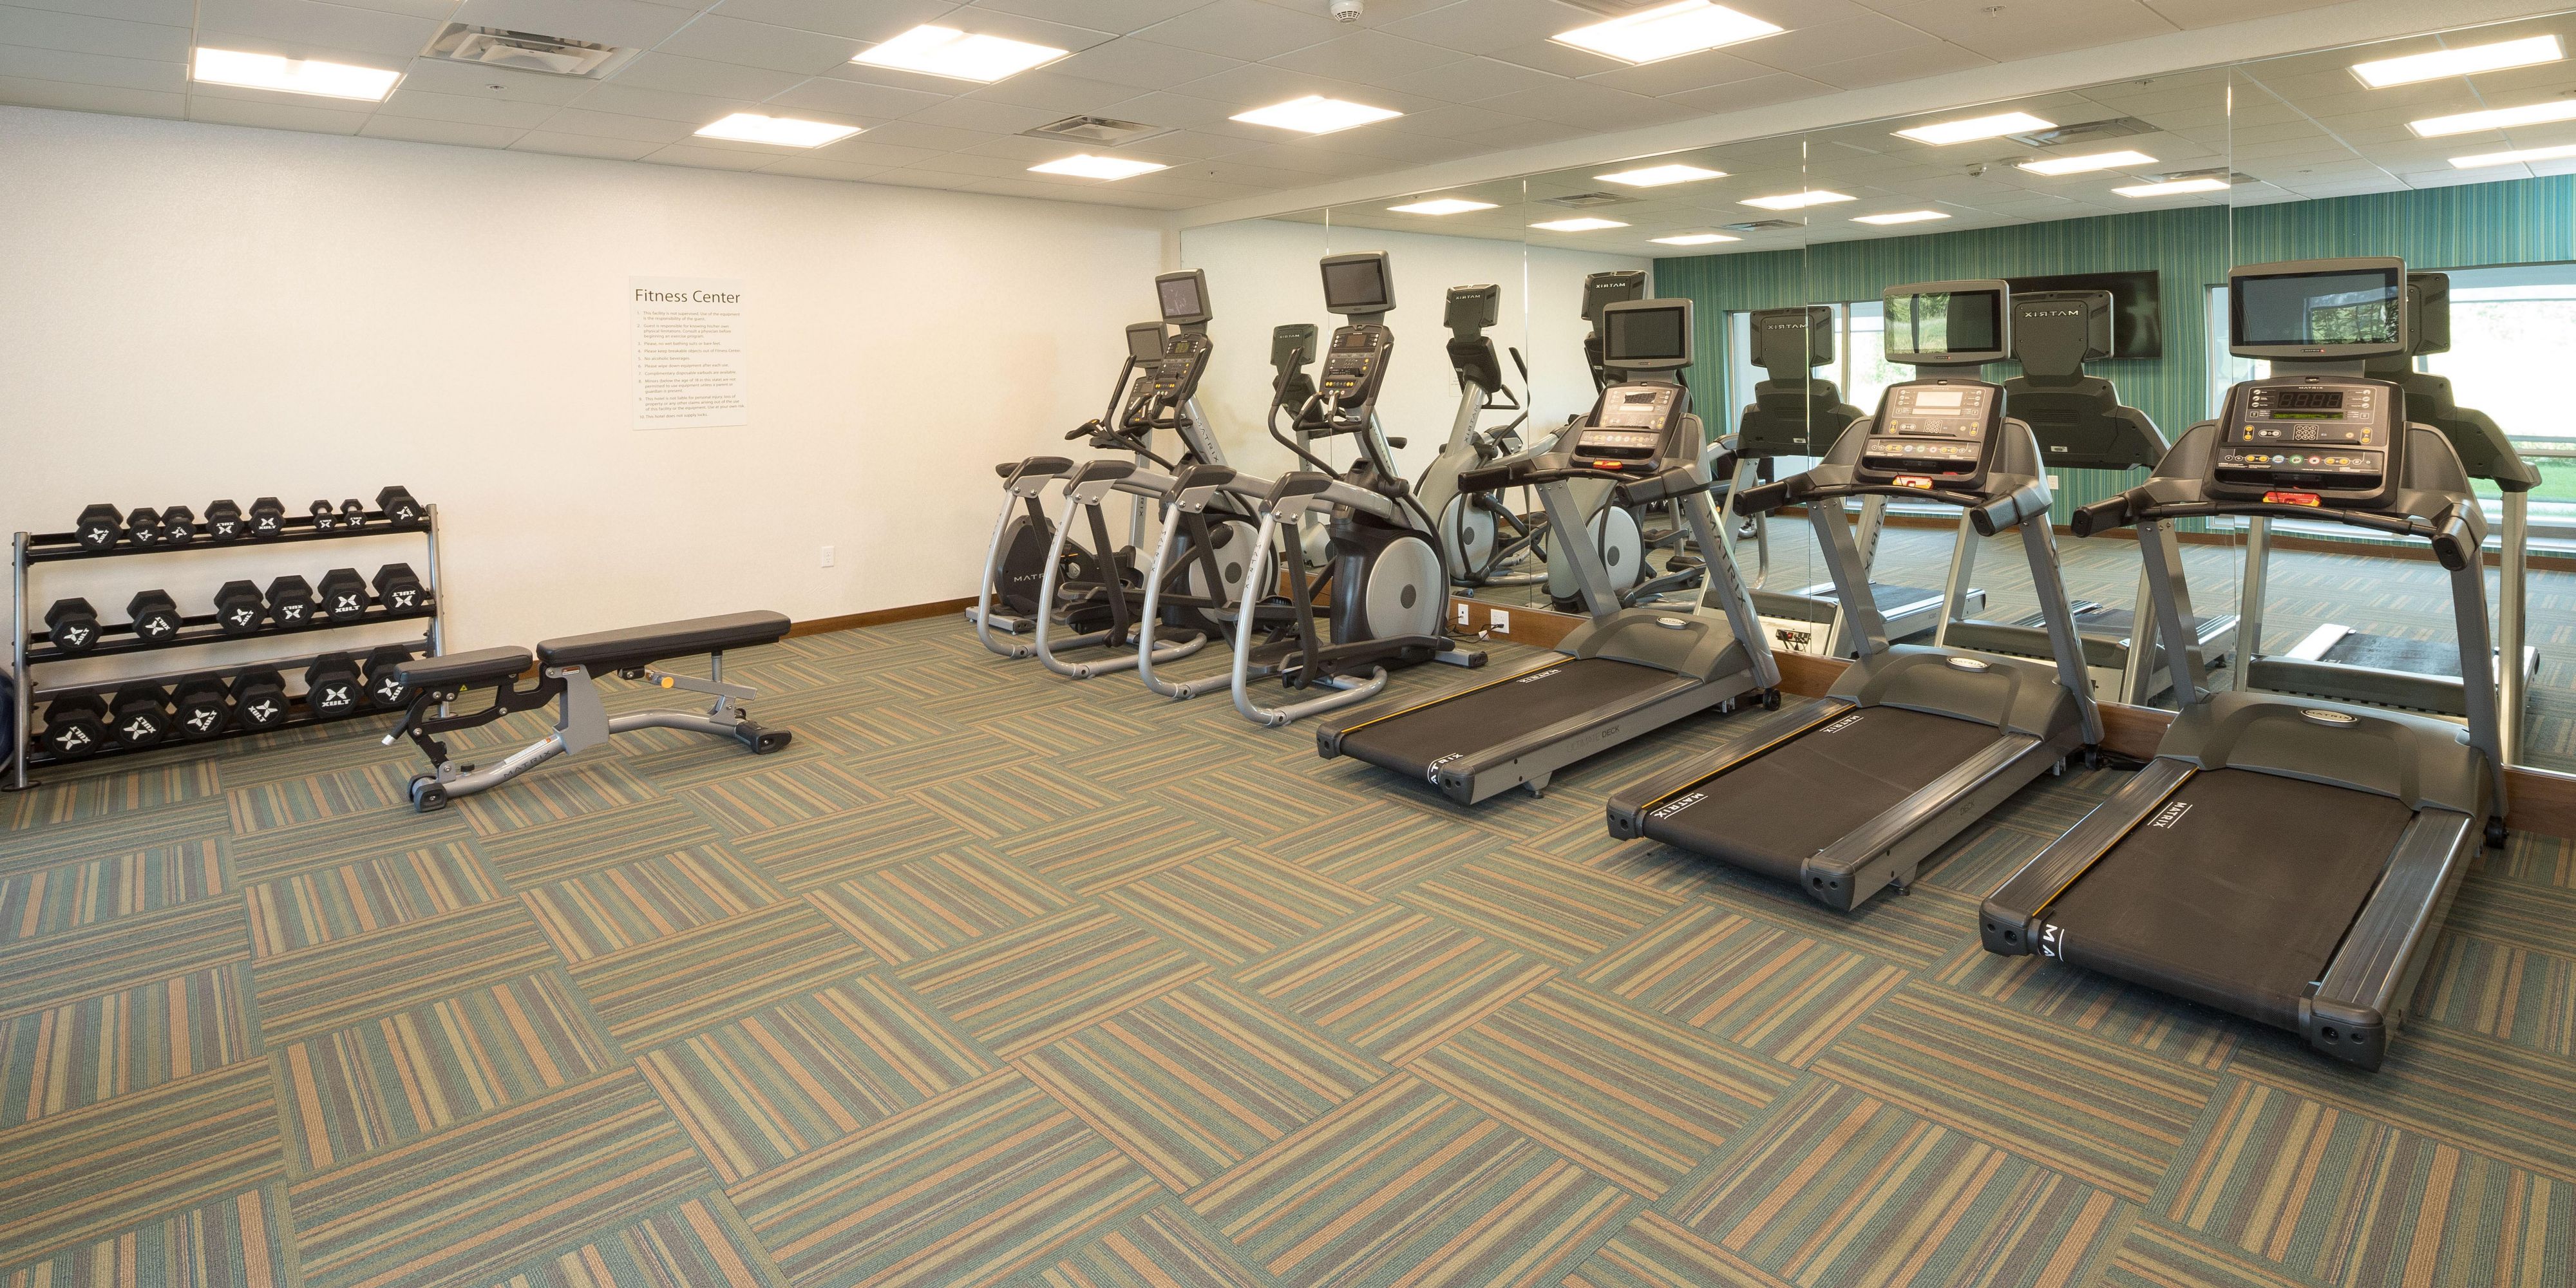 Start your day off feeling your best with our state of the art fitness center!  We are proud to have three treadmills, two elliptical machines, and a stationary bicycle that all include their own television screens so you can choose what you watch while you sweat!  Free weights and yoga mats are available in our open workout area.